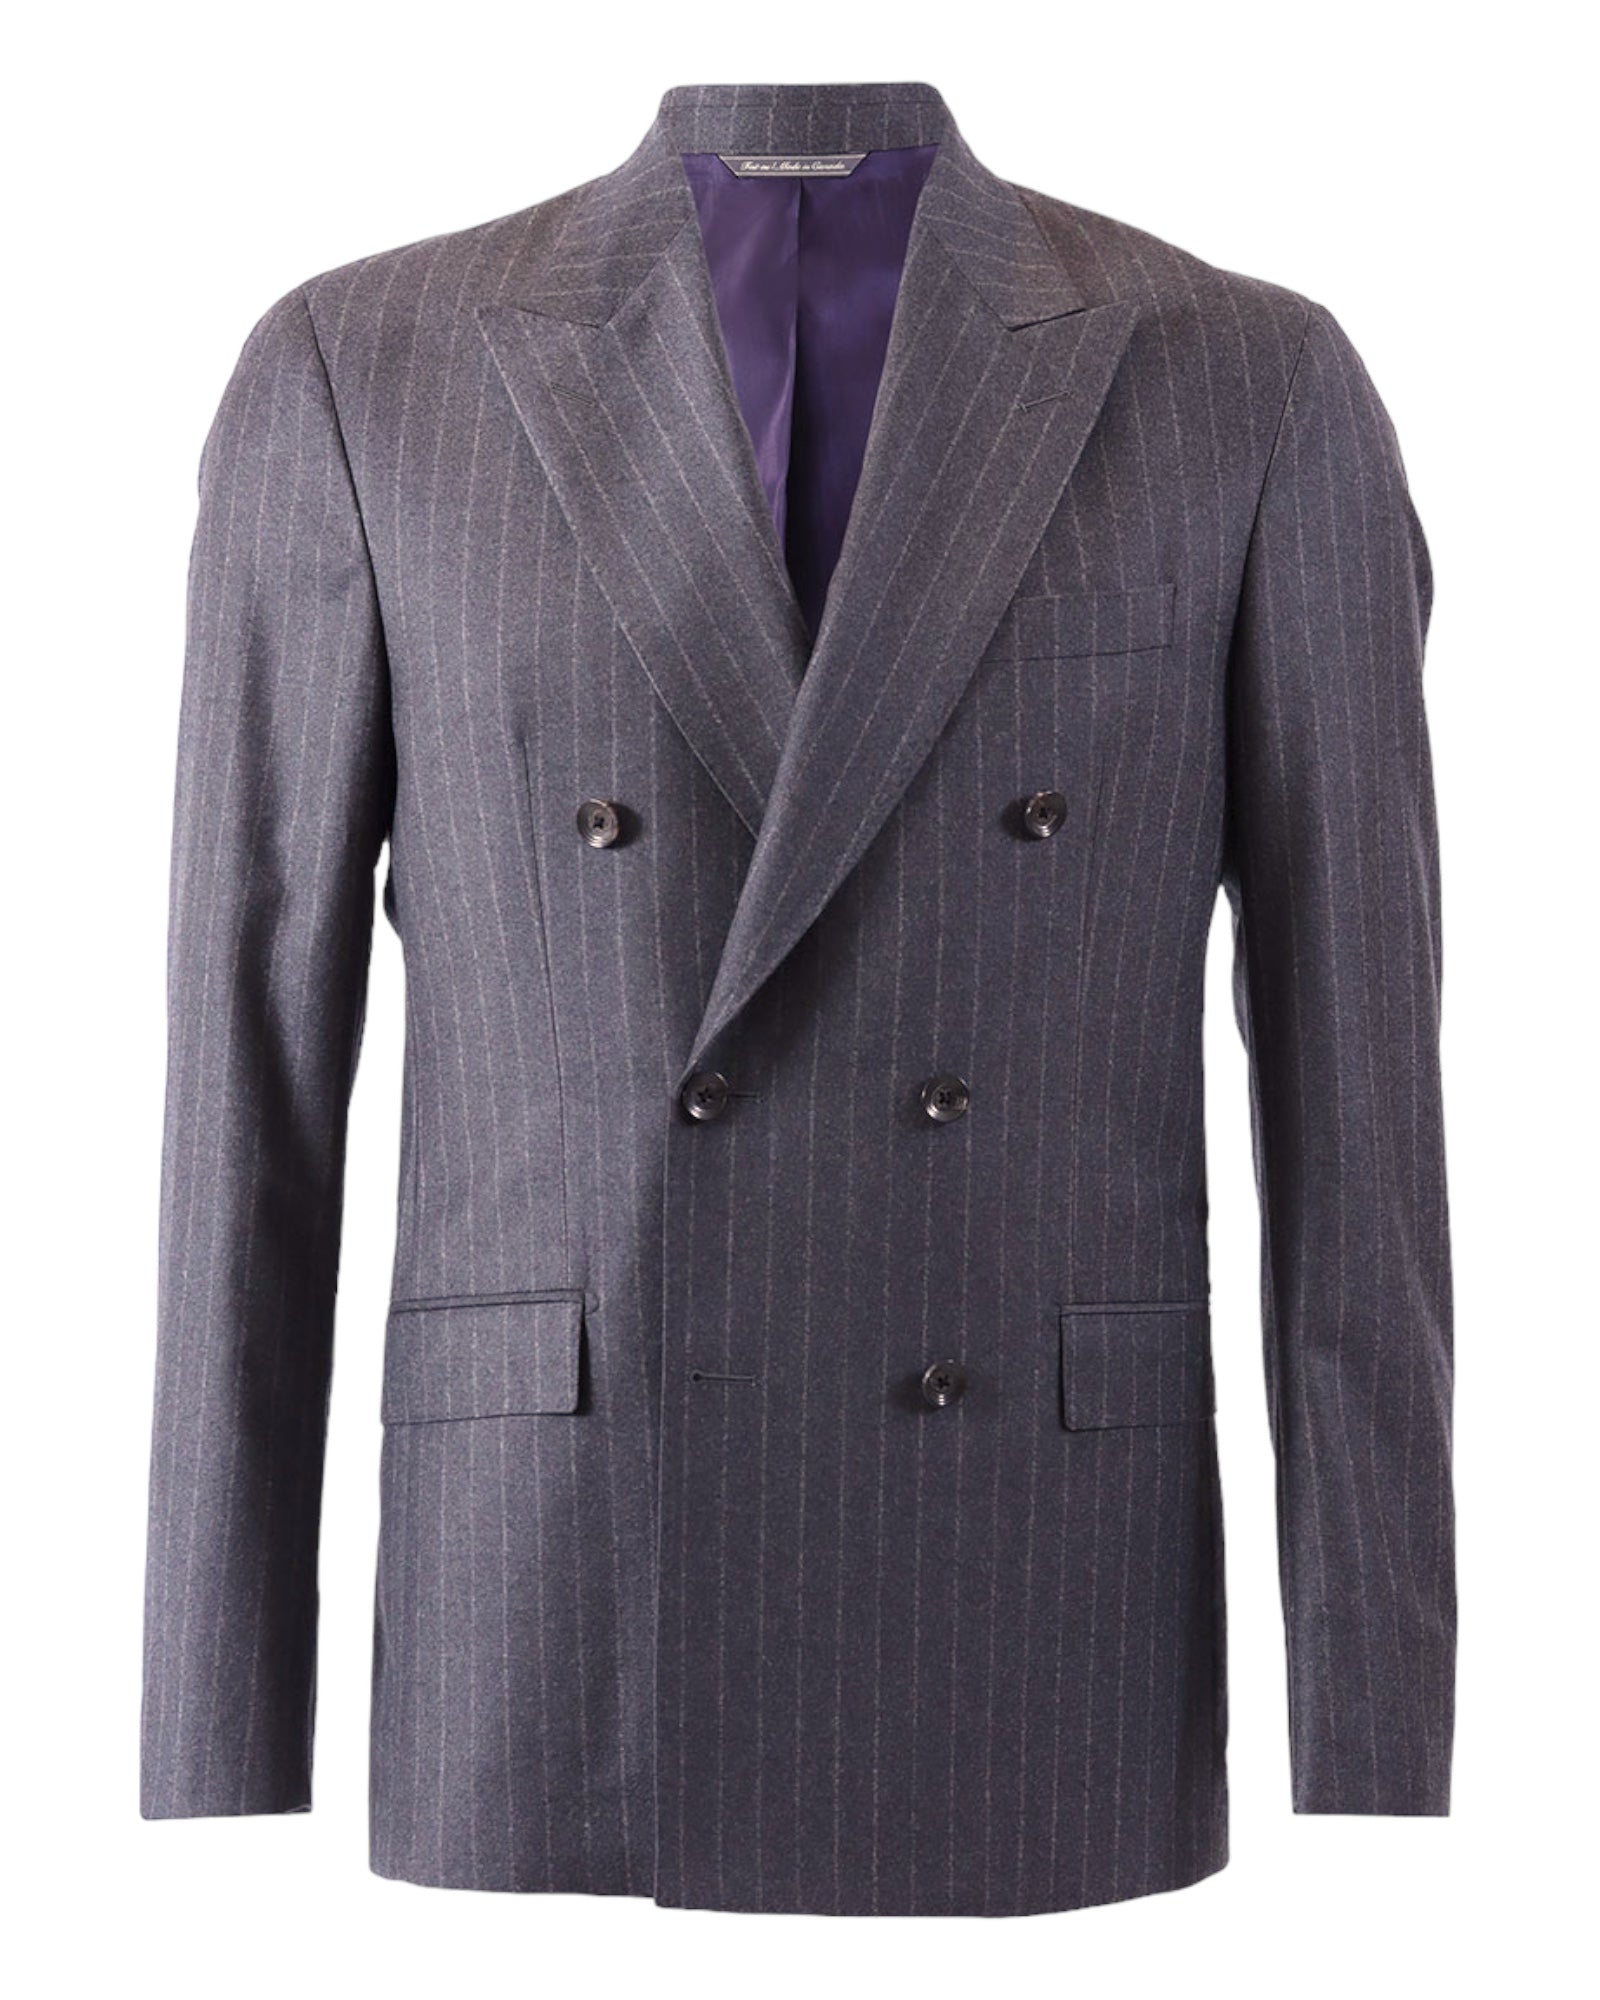 Double-breasted Chalk Stripe Suit - Charcoal Grey SUITS40R